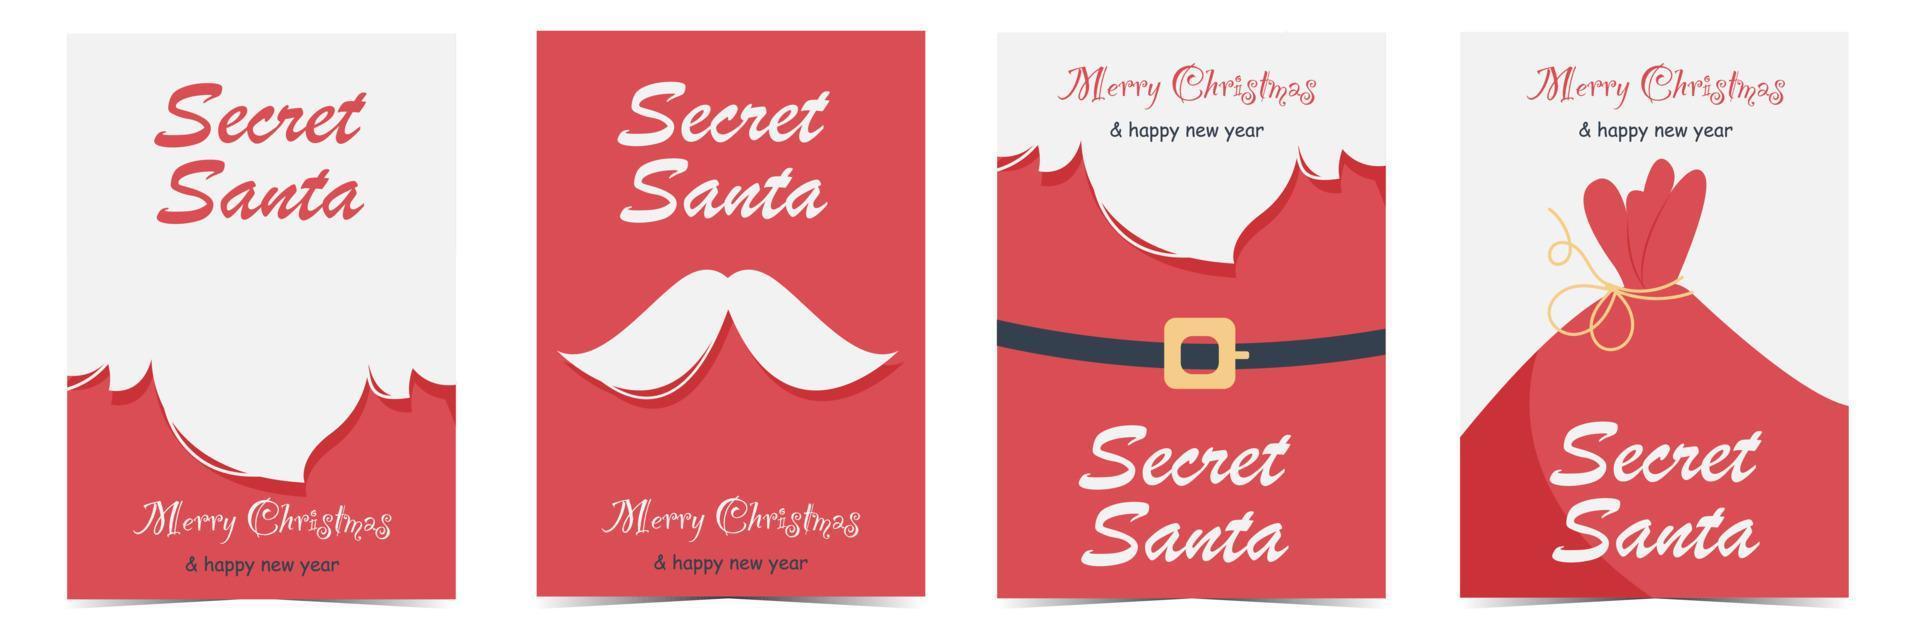 Secret Santa Claus cards set. Merry Christmas and Happy New Year banner  template or invitation with white beard and moustache, red Santa suit and  bag with gifts. Flat vector illustration. 4892189 Vector